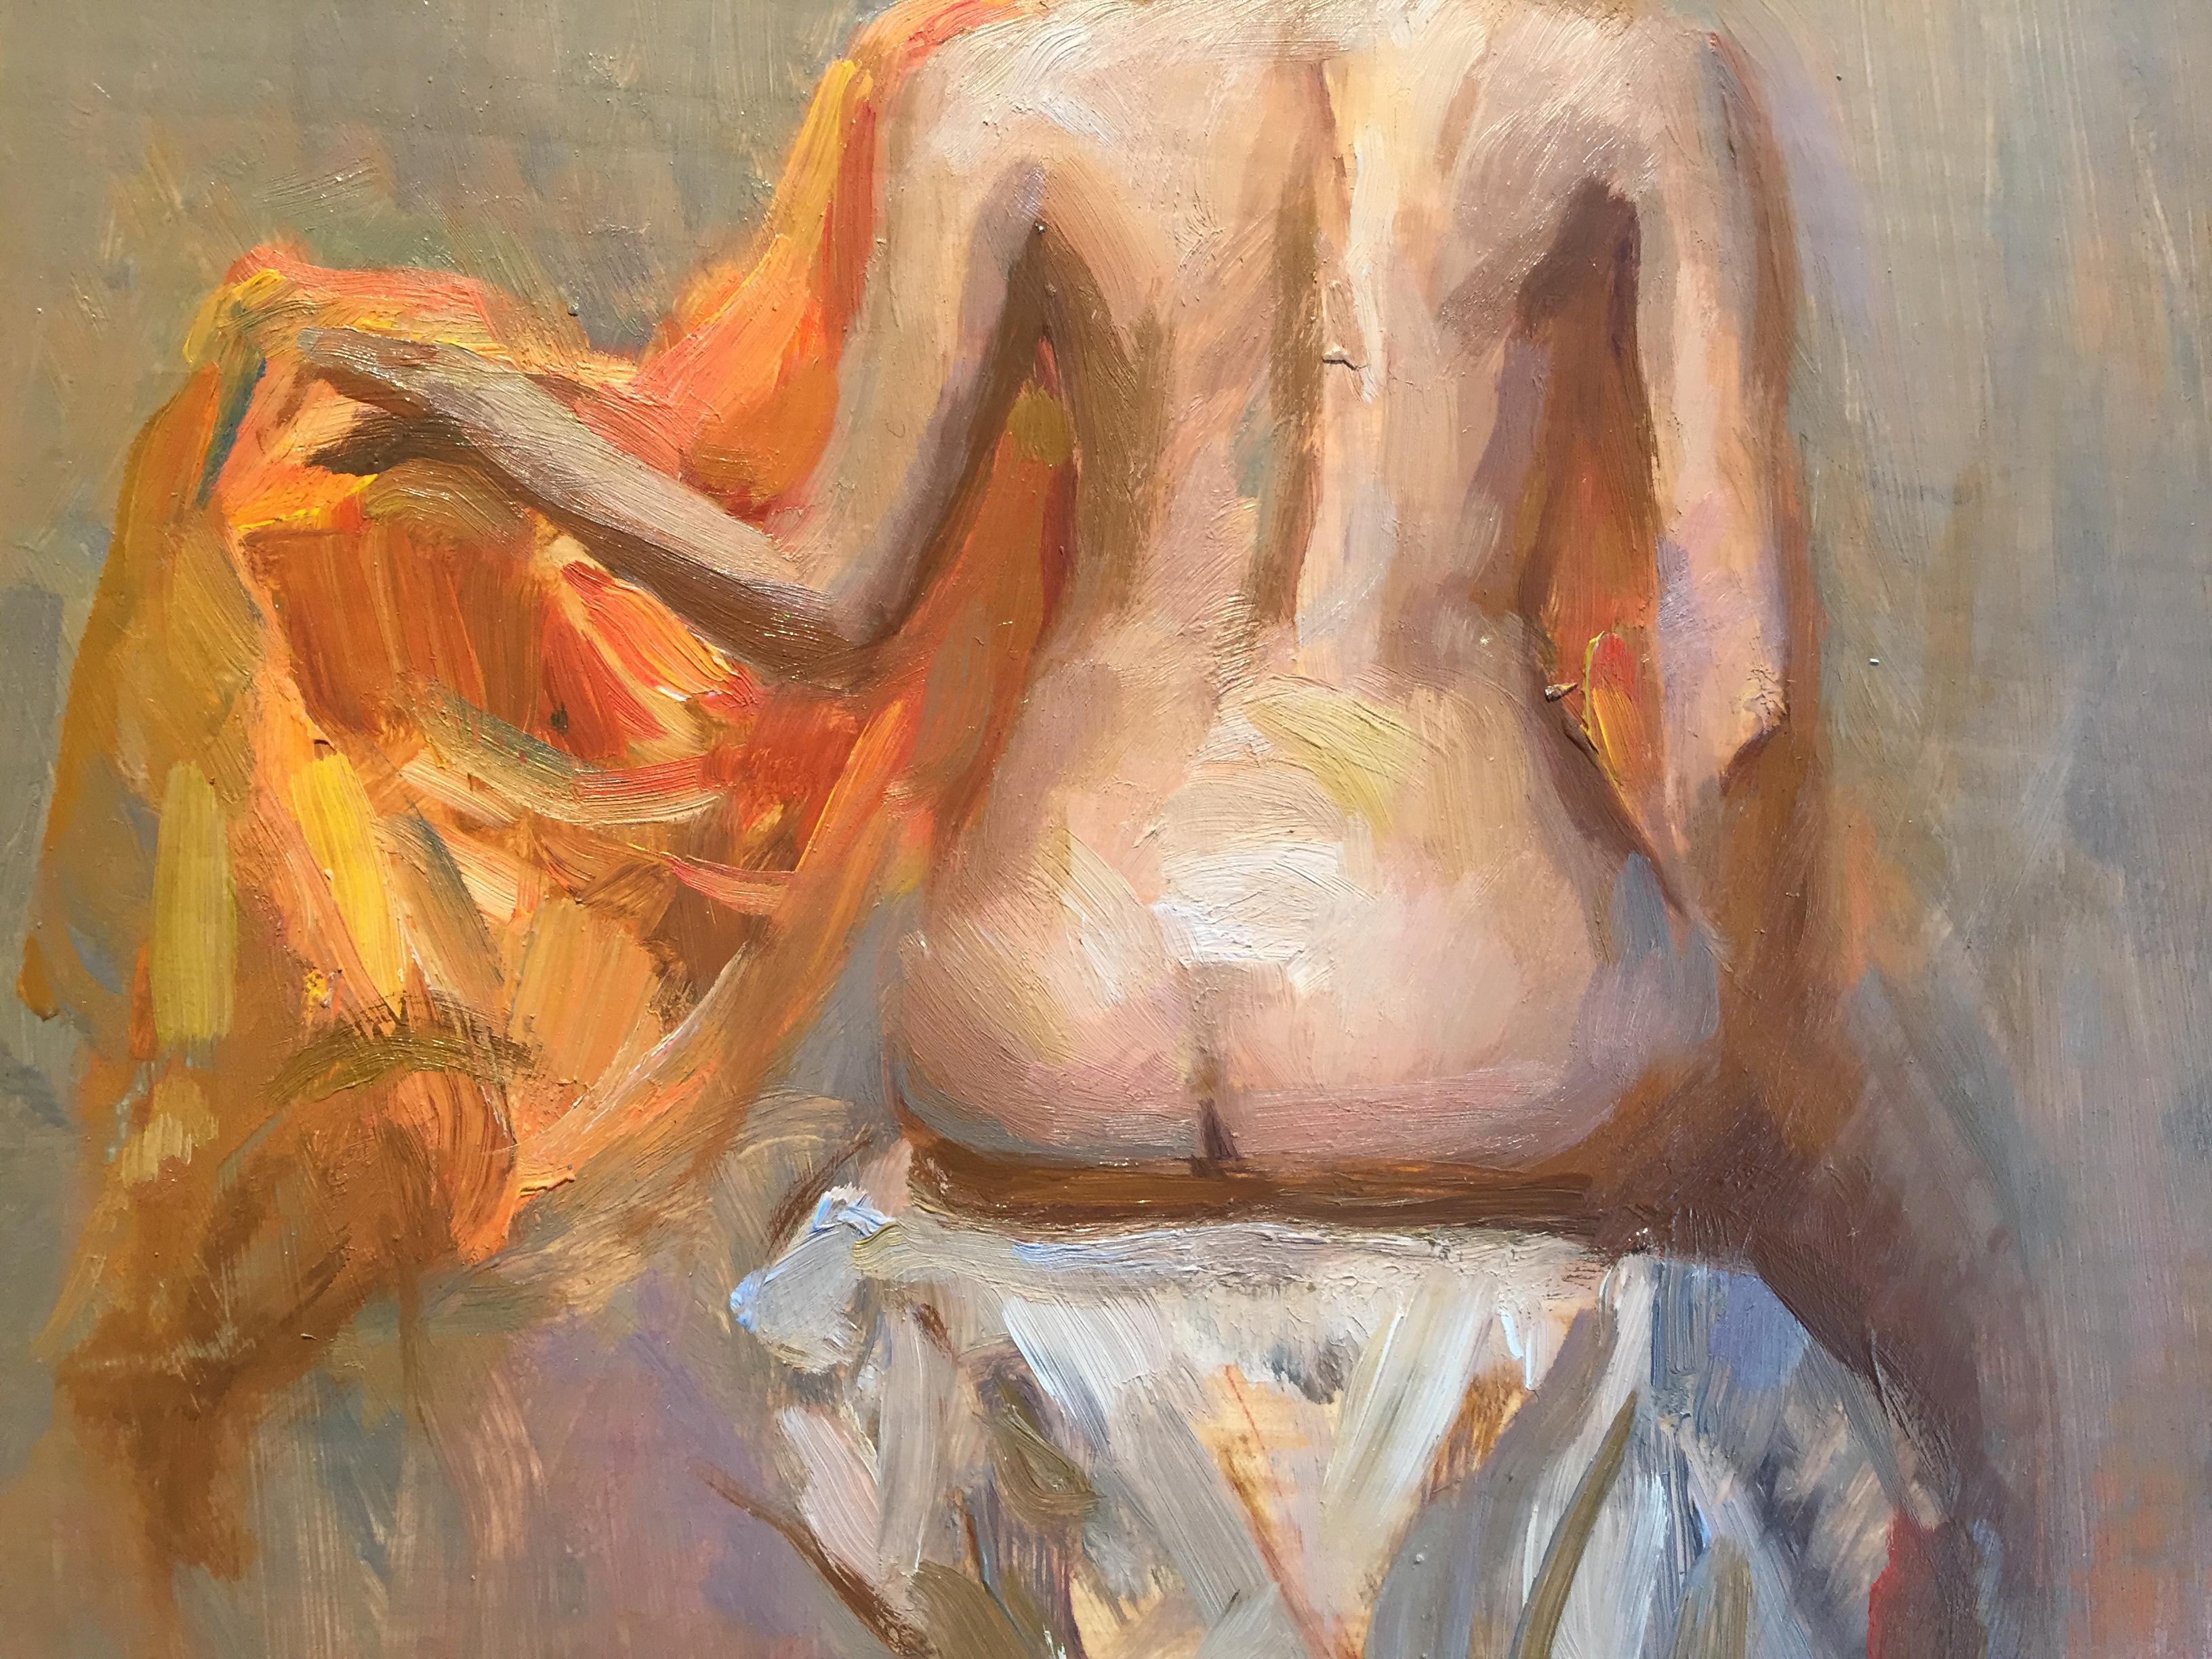 Painted from life, a nude, female figure sits with an orange cloth draped around her shoulders. Ramiro places the figure on a pedestal, draped in white linens. The figure's back is revealed, curving sensually and naturally, hair pulled up in a bun